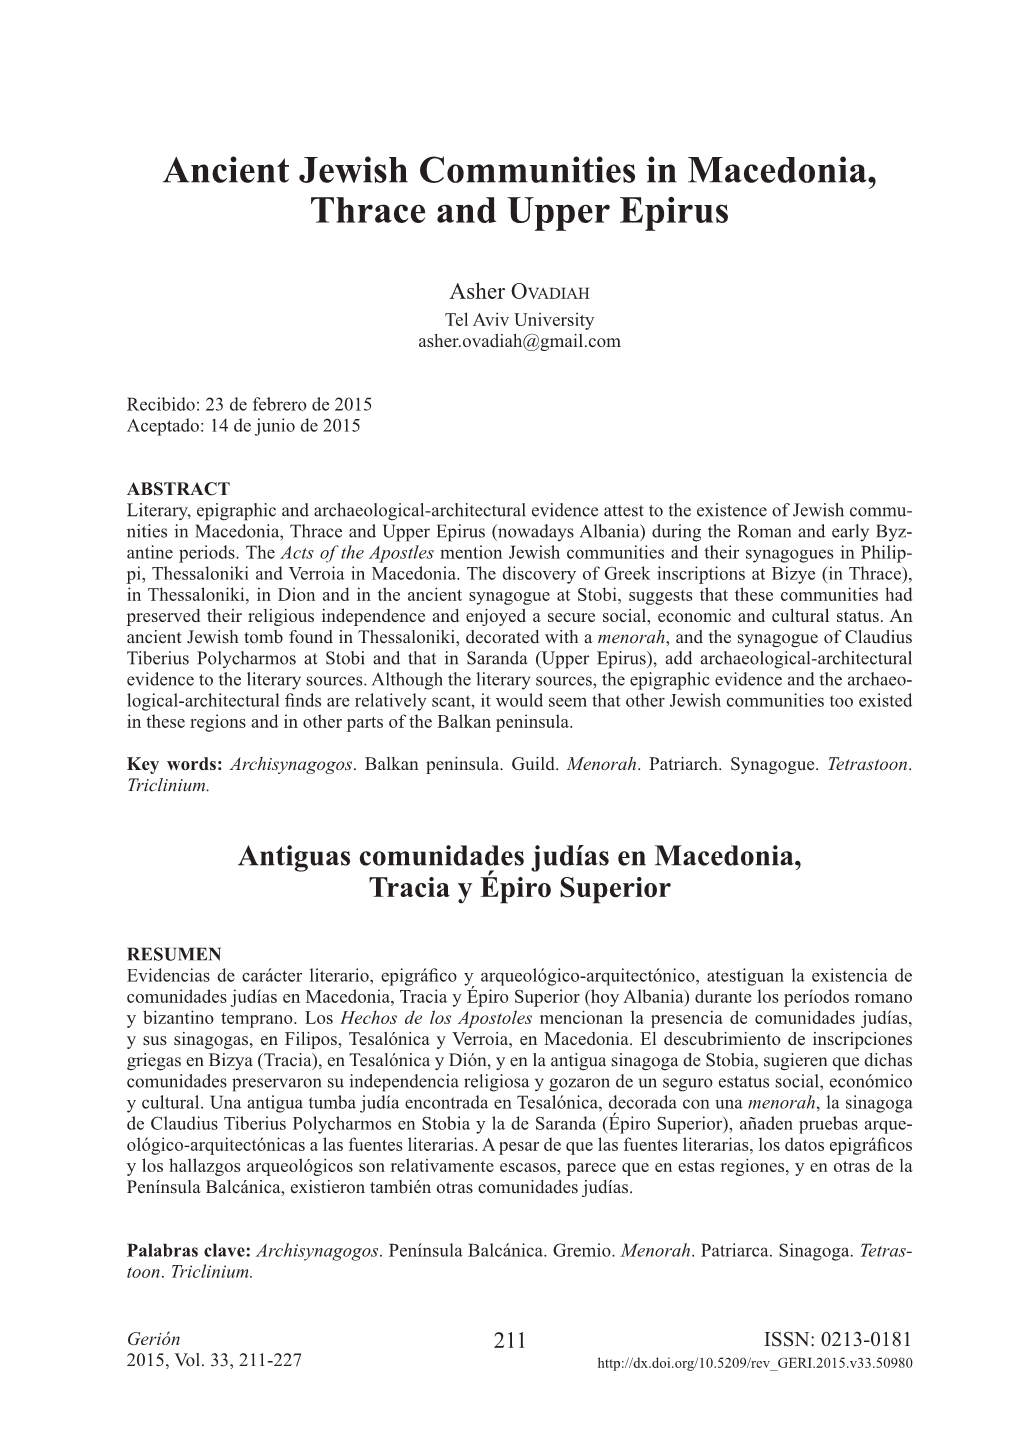 Ancient Jewish Communities in Macedonia, Thrace and Upper Epirus